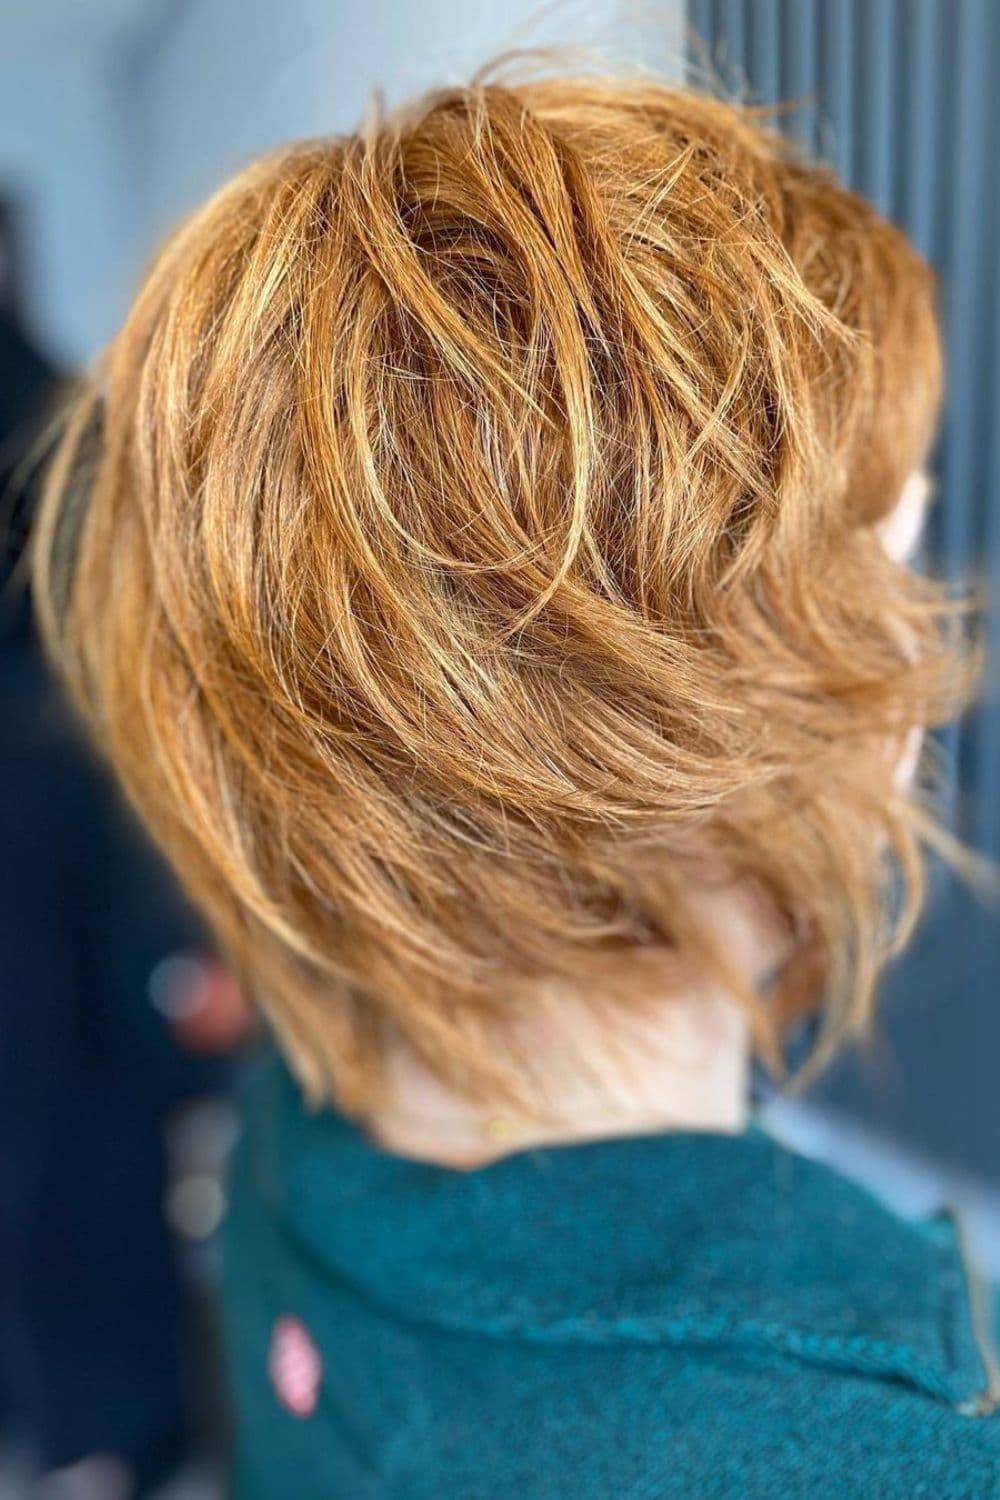 Close-up shot of a woman's hair with a blonde short, textured wolf cut.